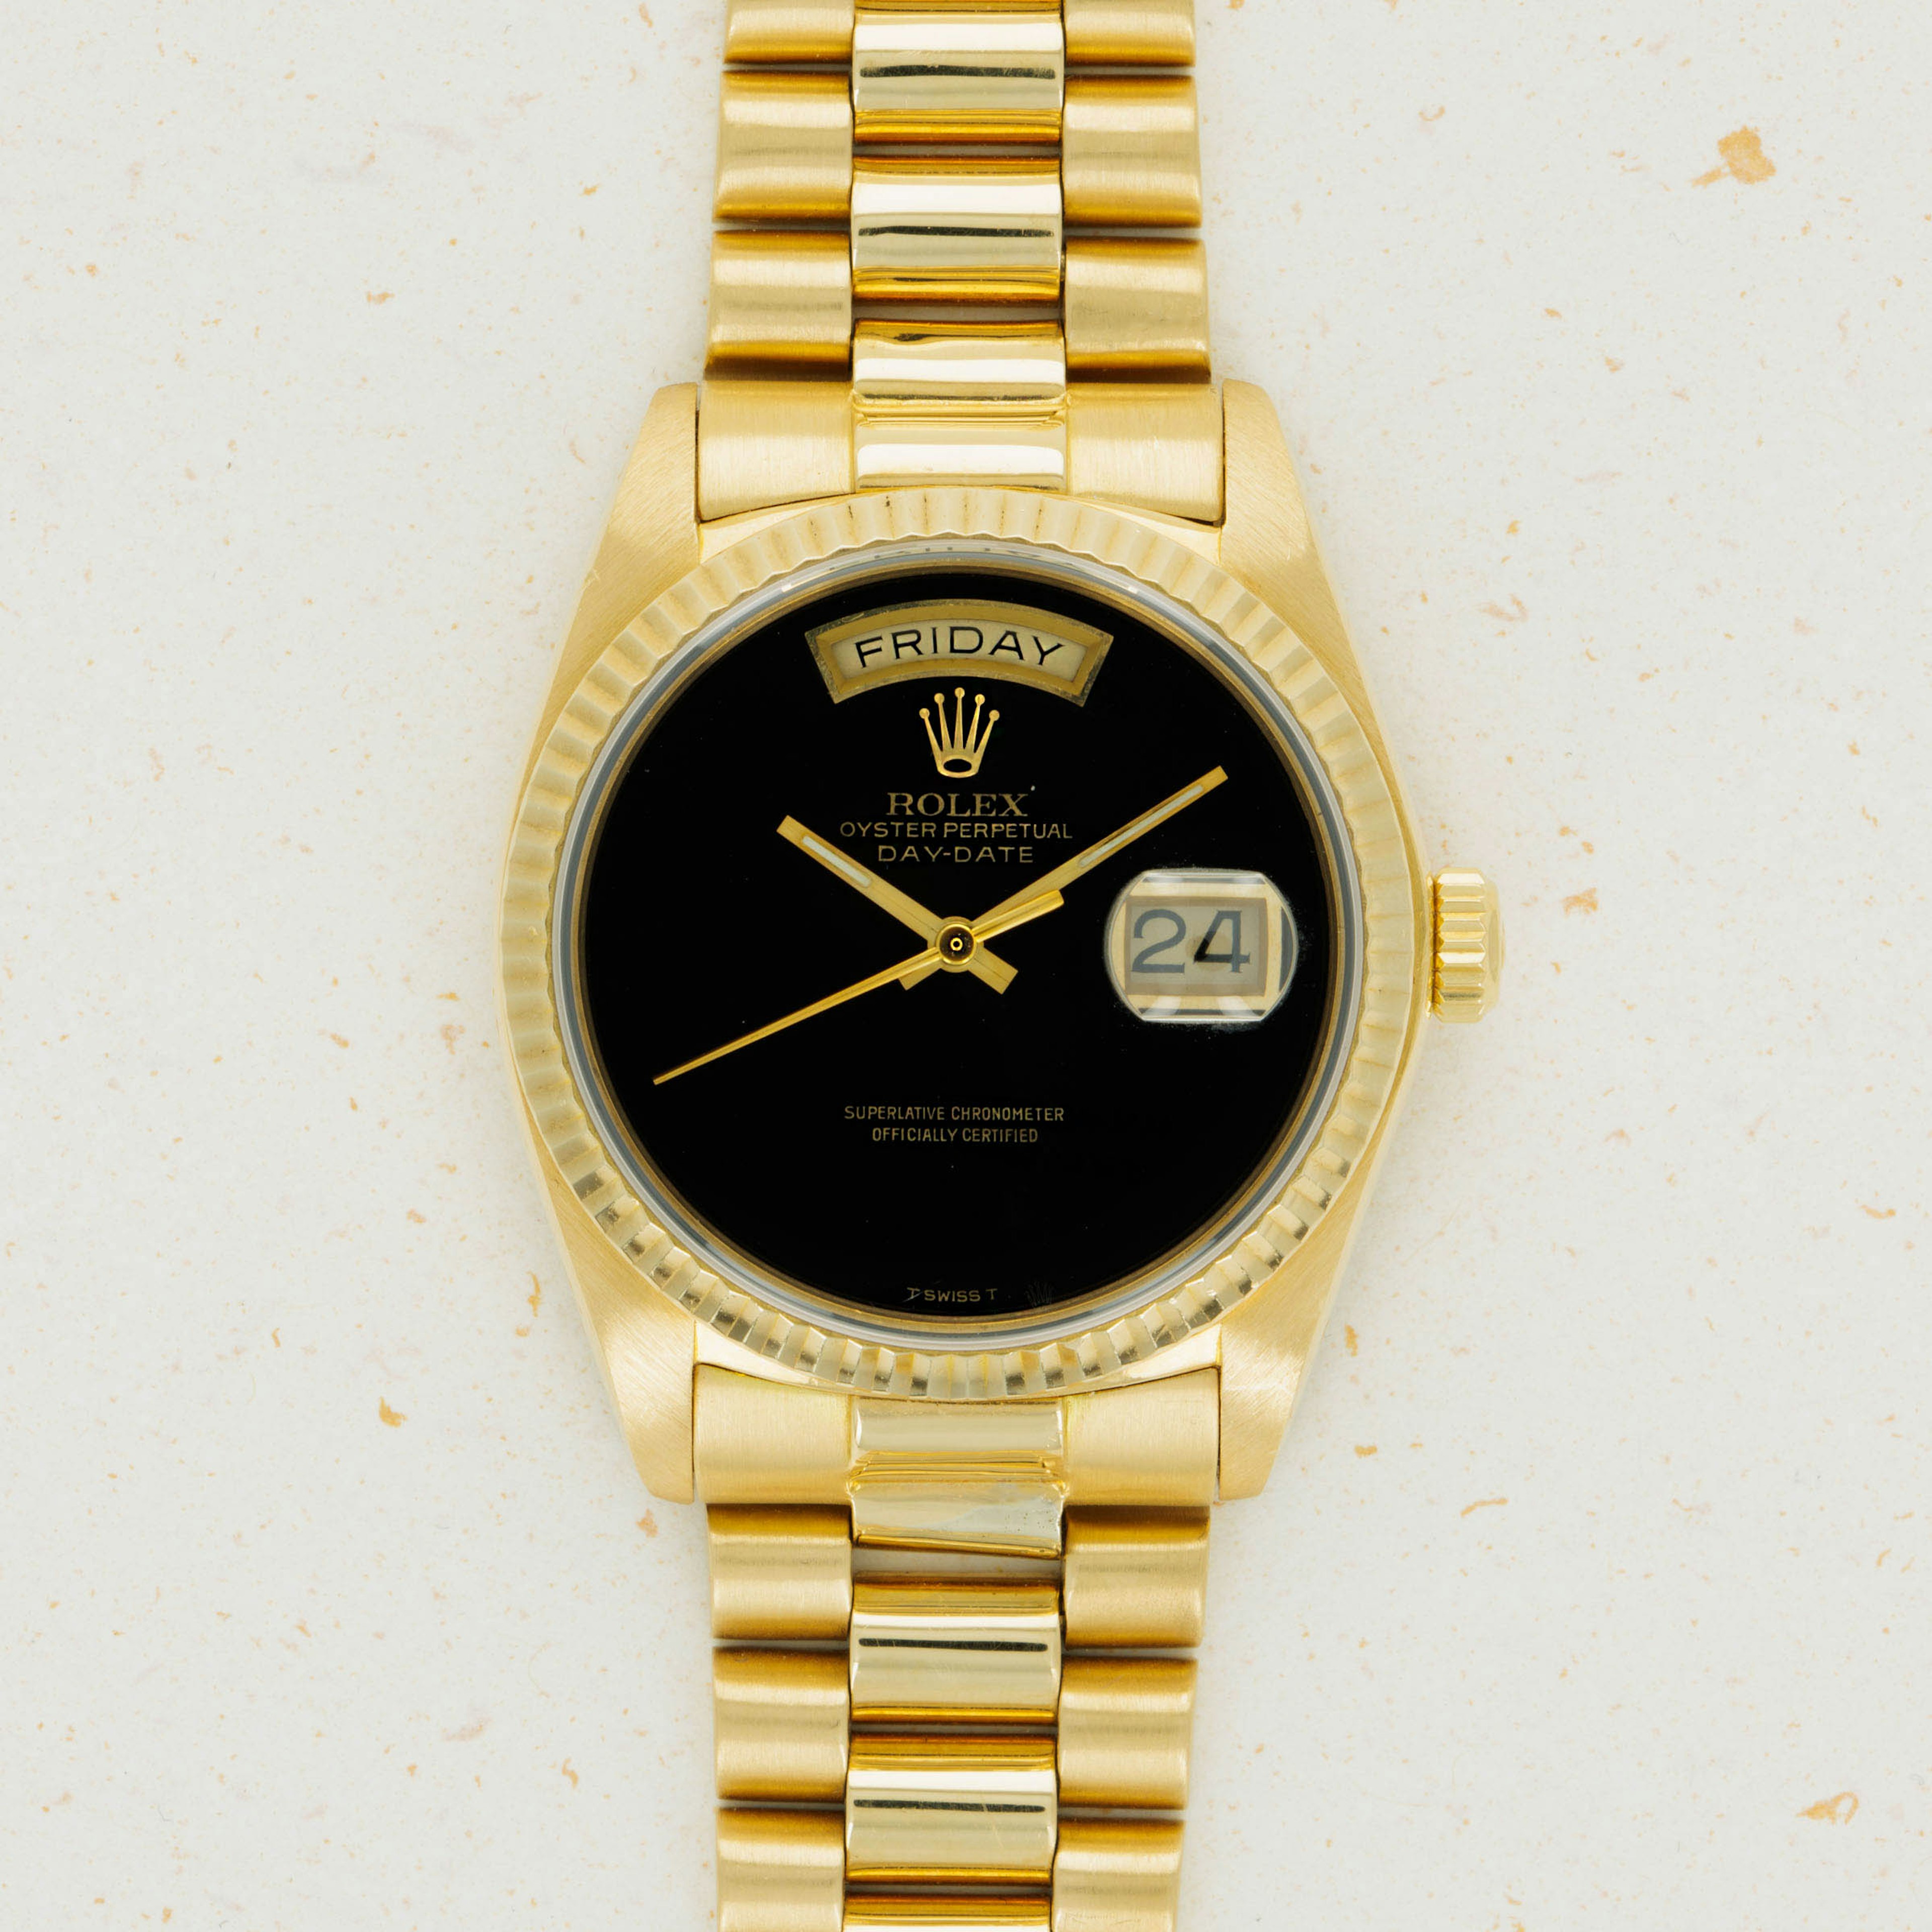 Thumbnail for Rolex Day-Date 18078 Onyx Dial Yellow Gold